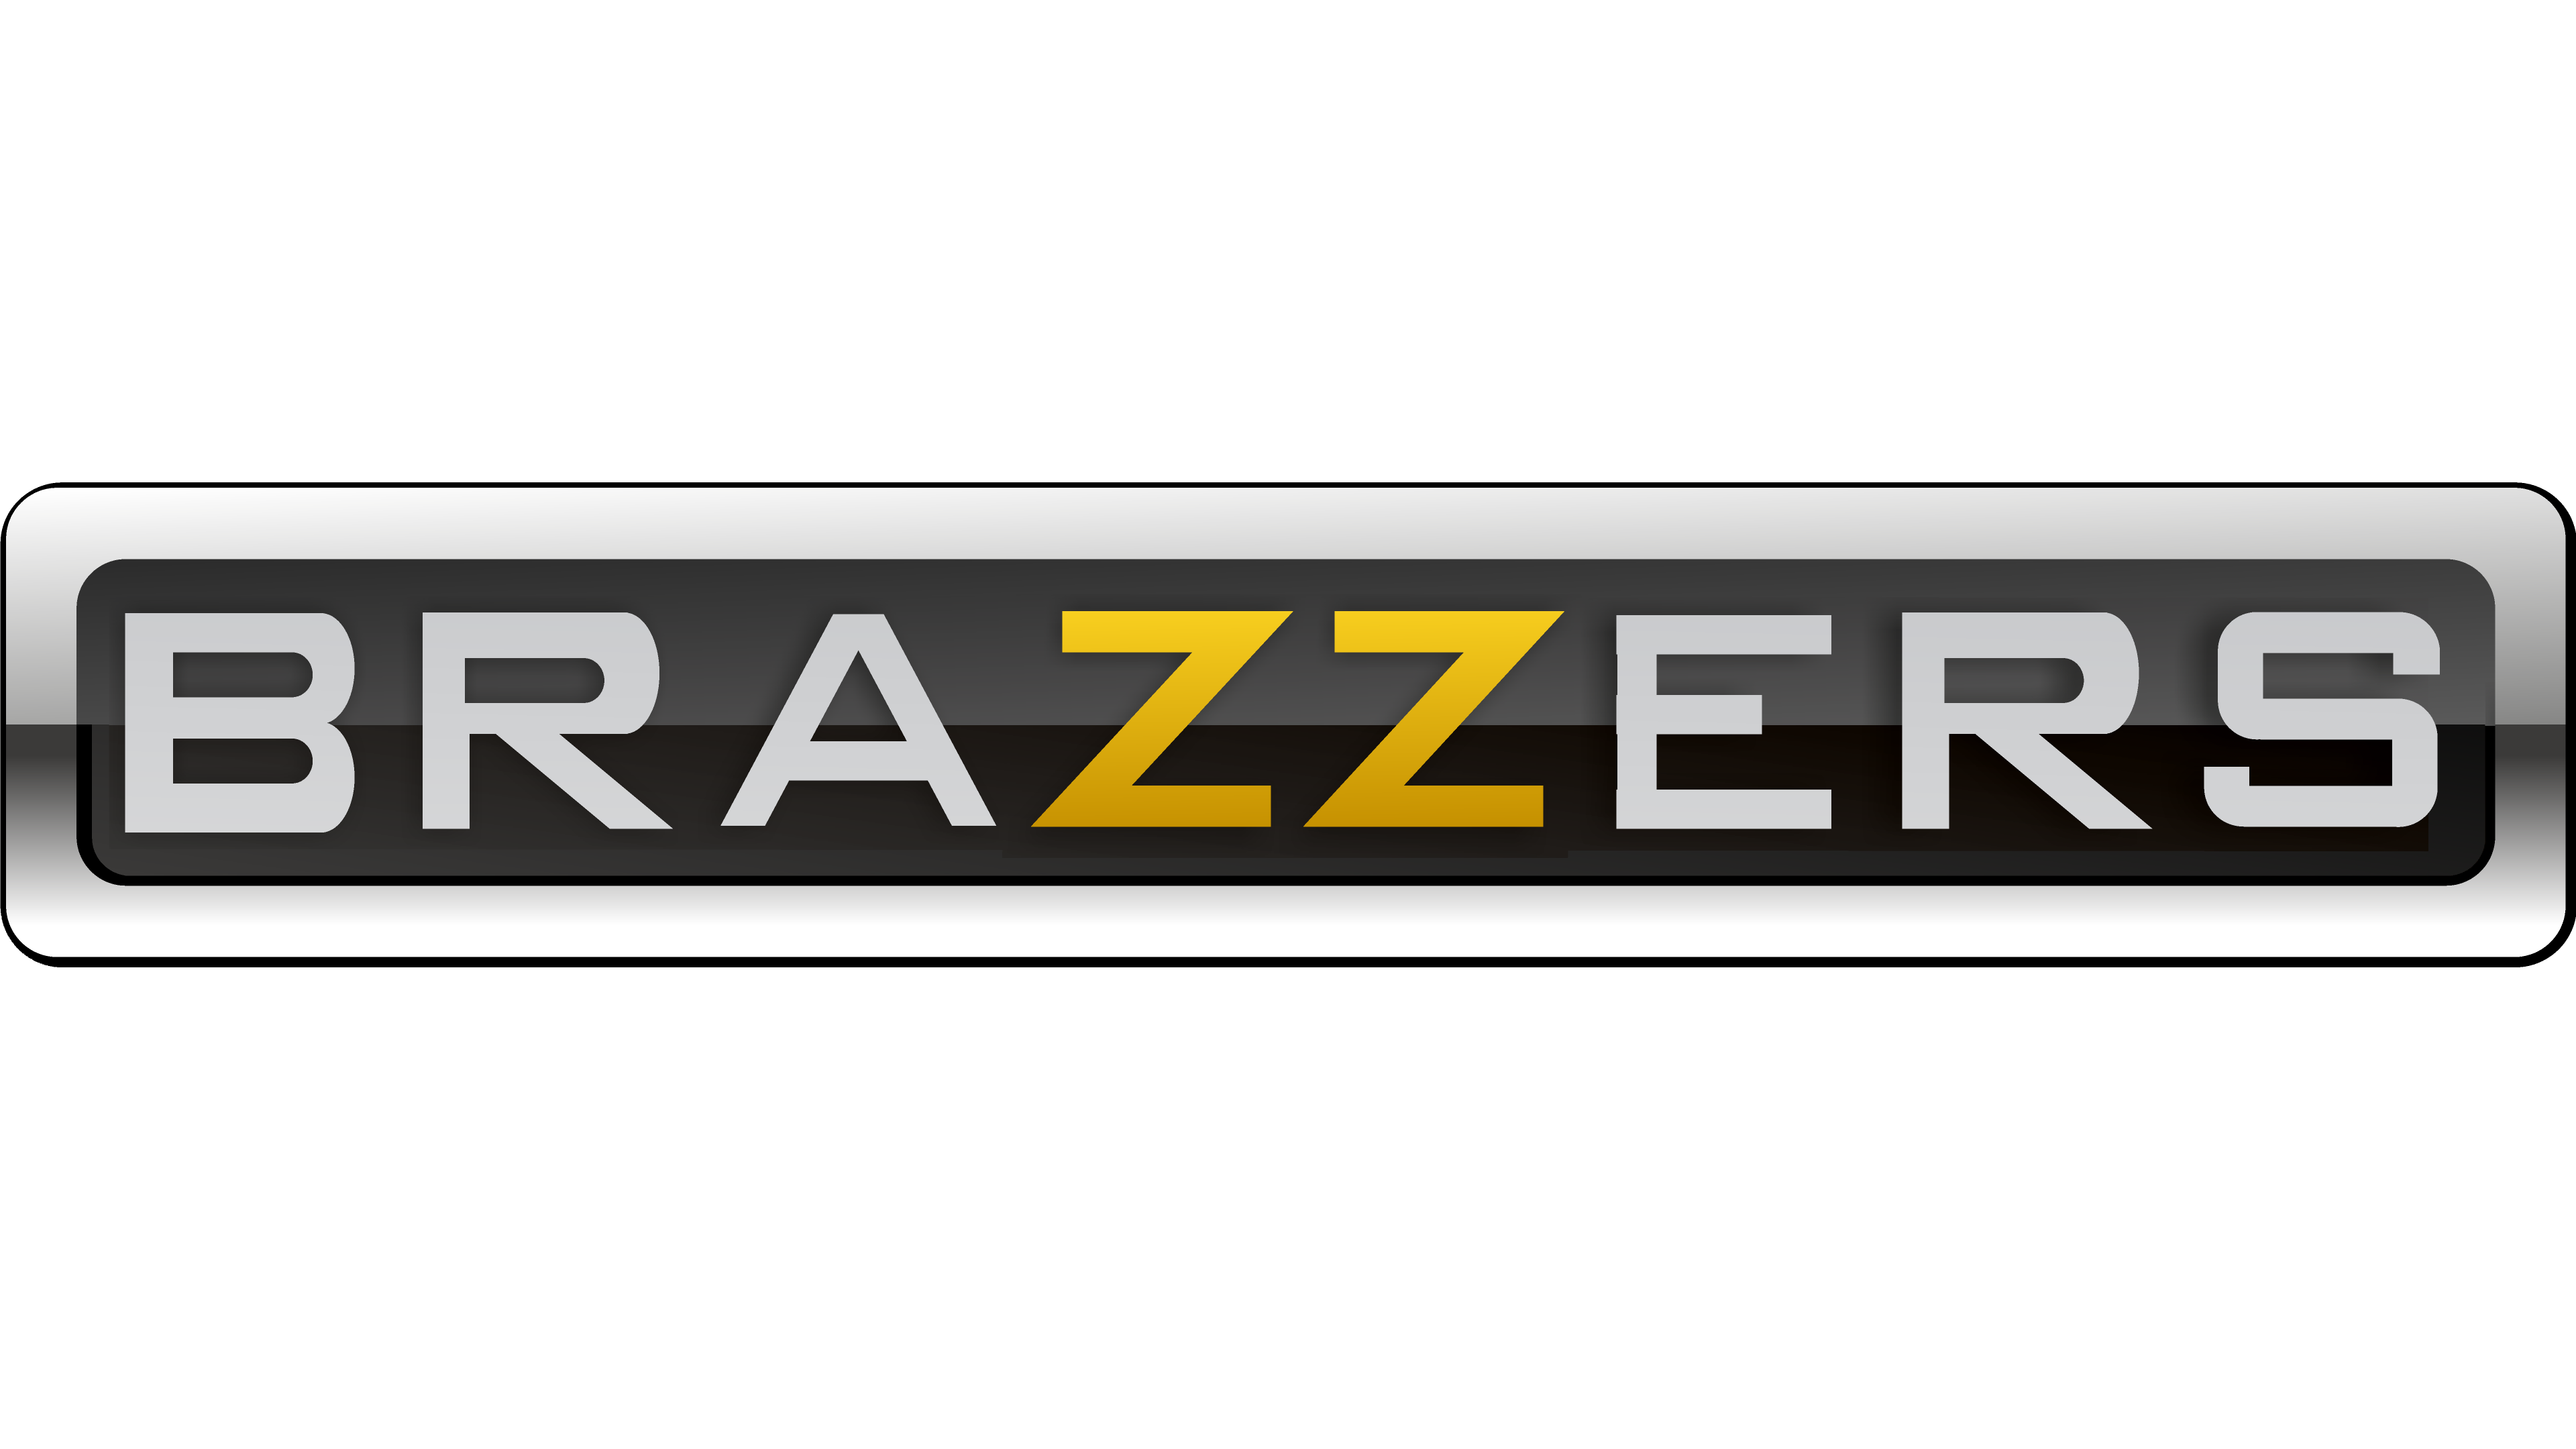 Brazzers gift card trade in